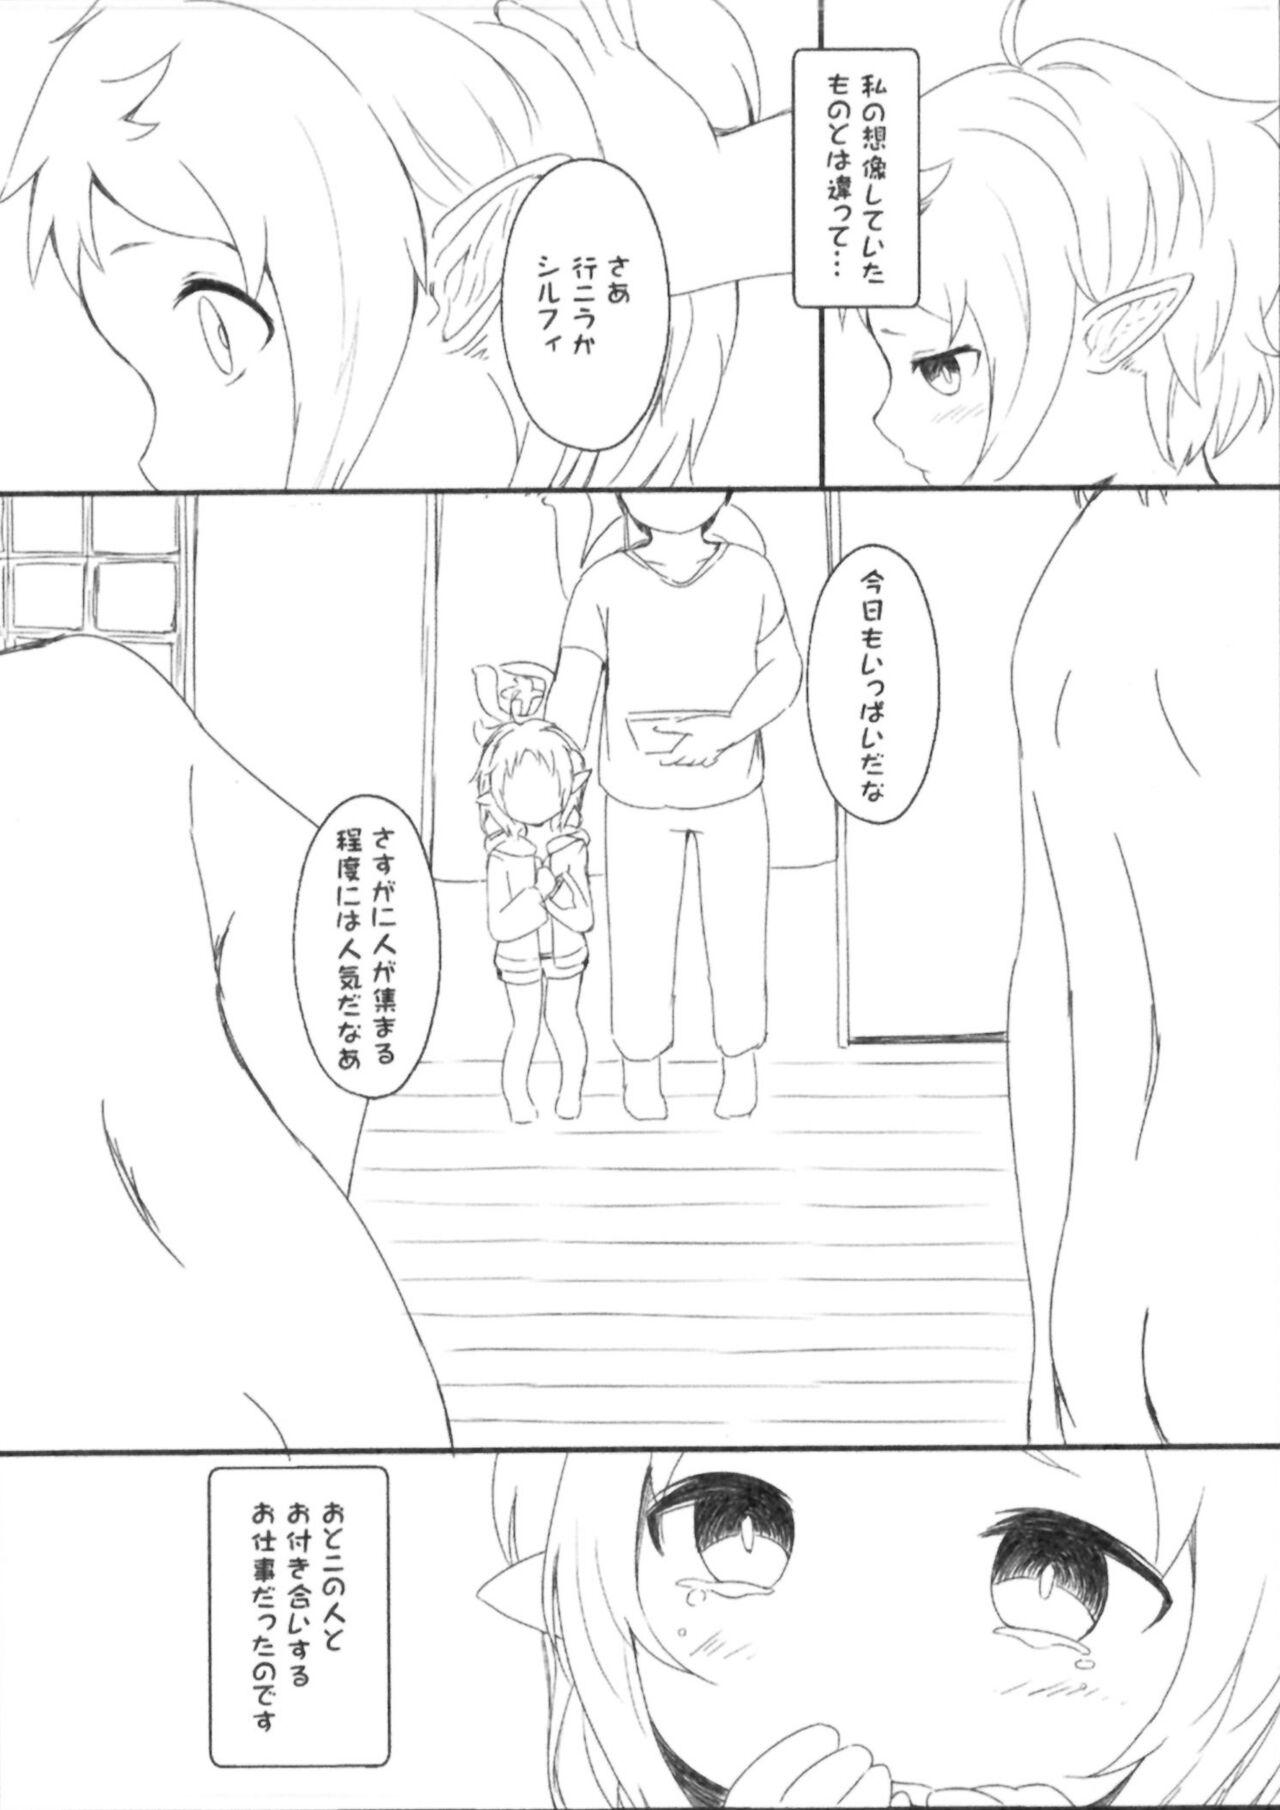 Flagra I want to take a bath with Sylphyt! - Mushoku tensei Style - Page 4